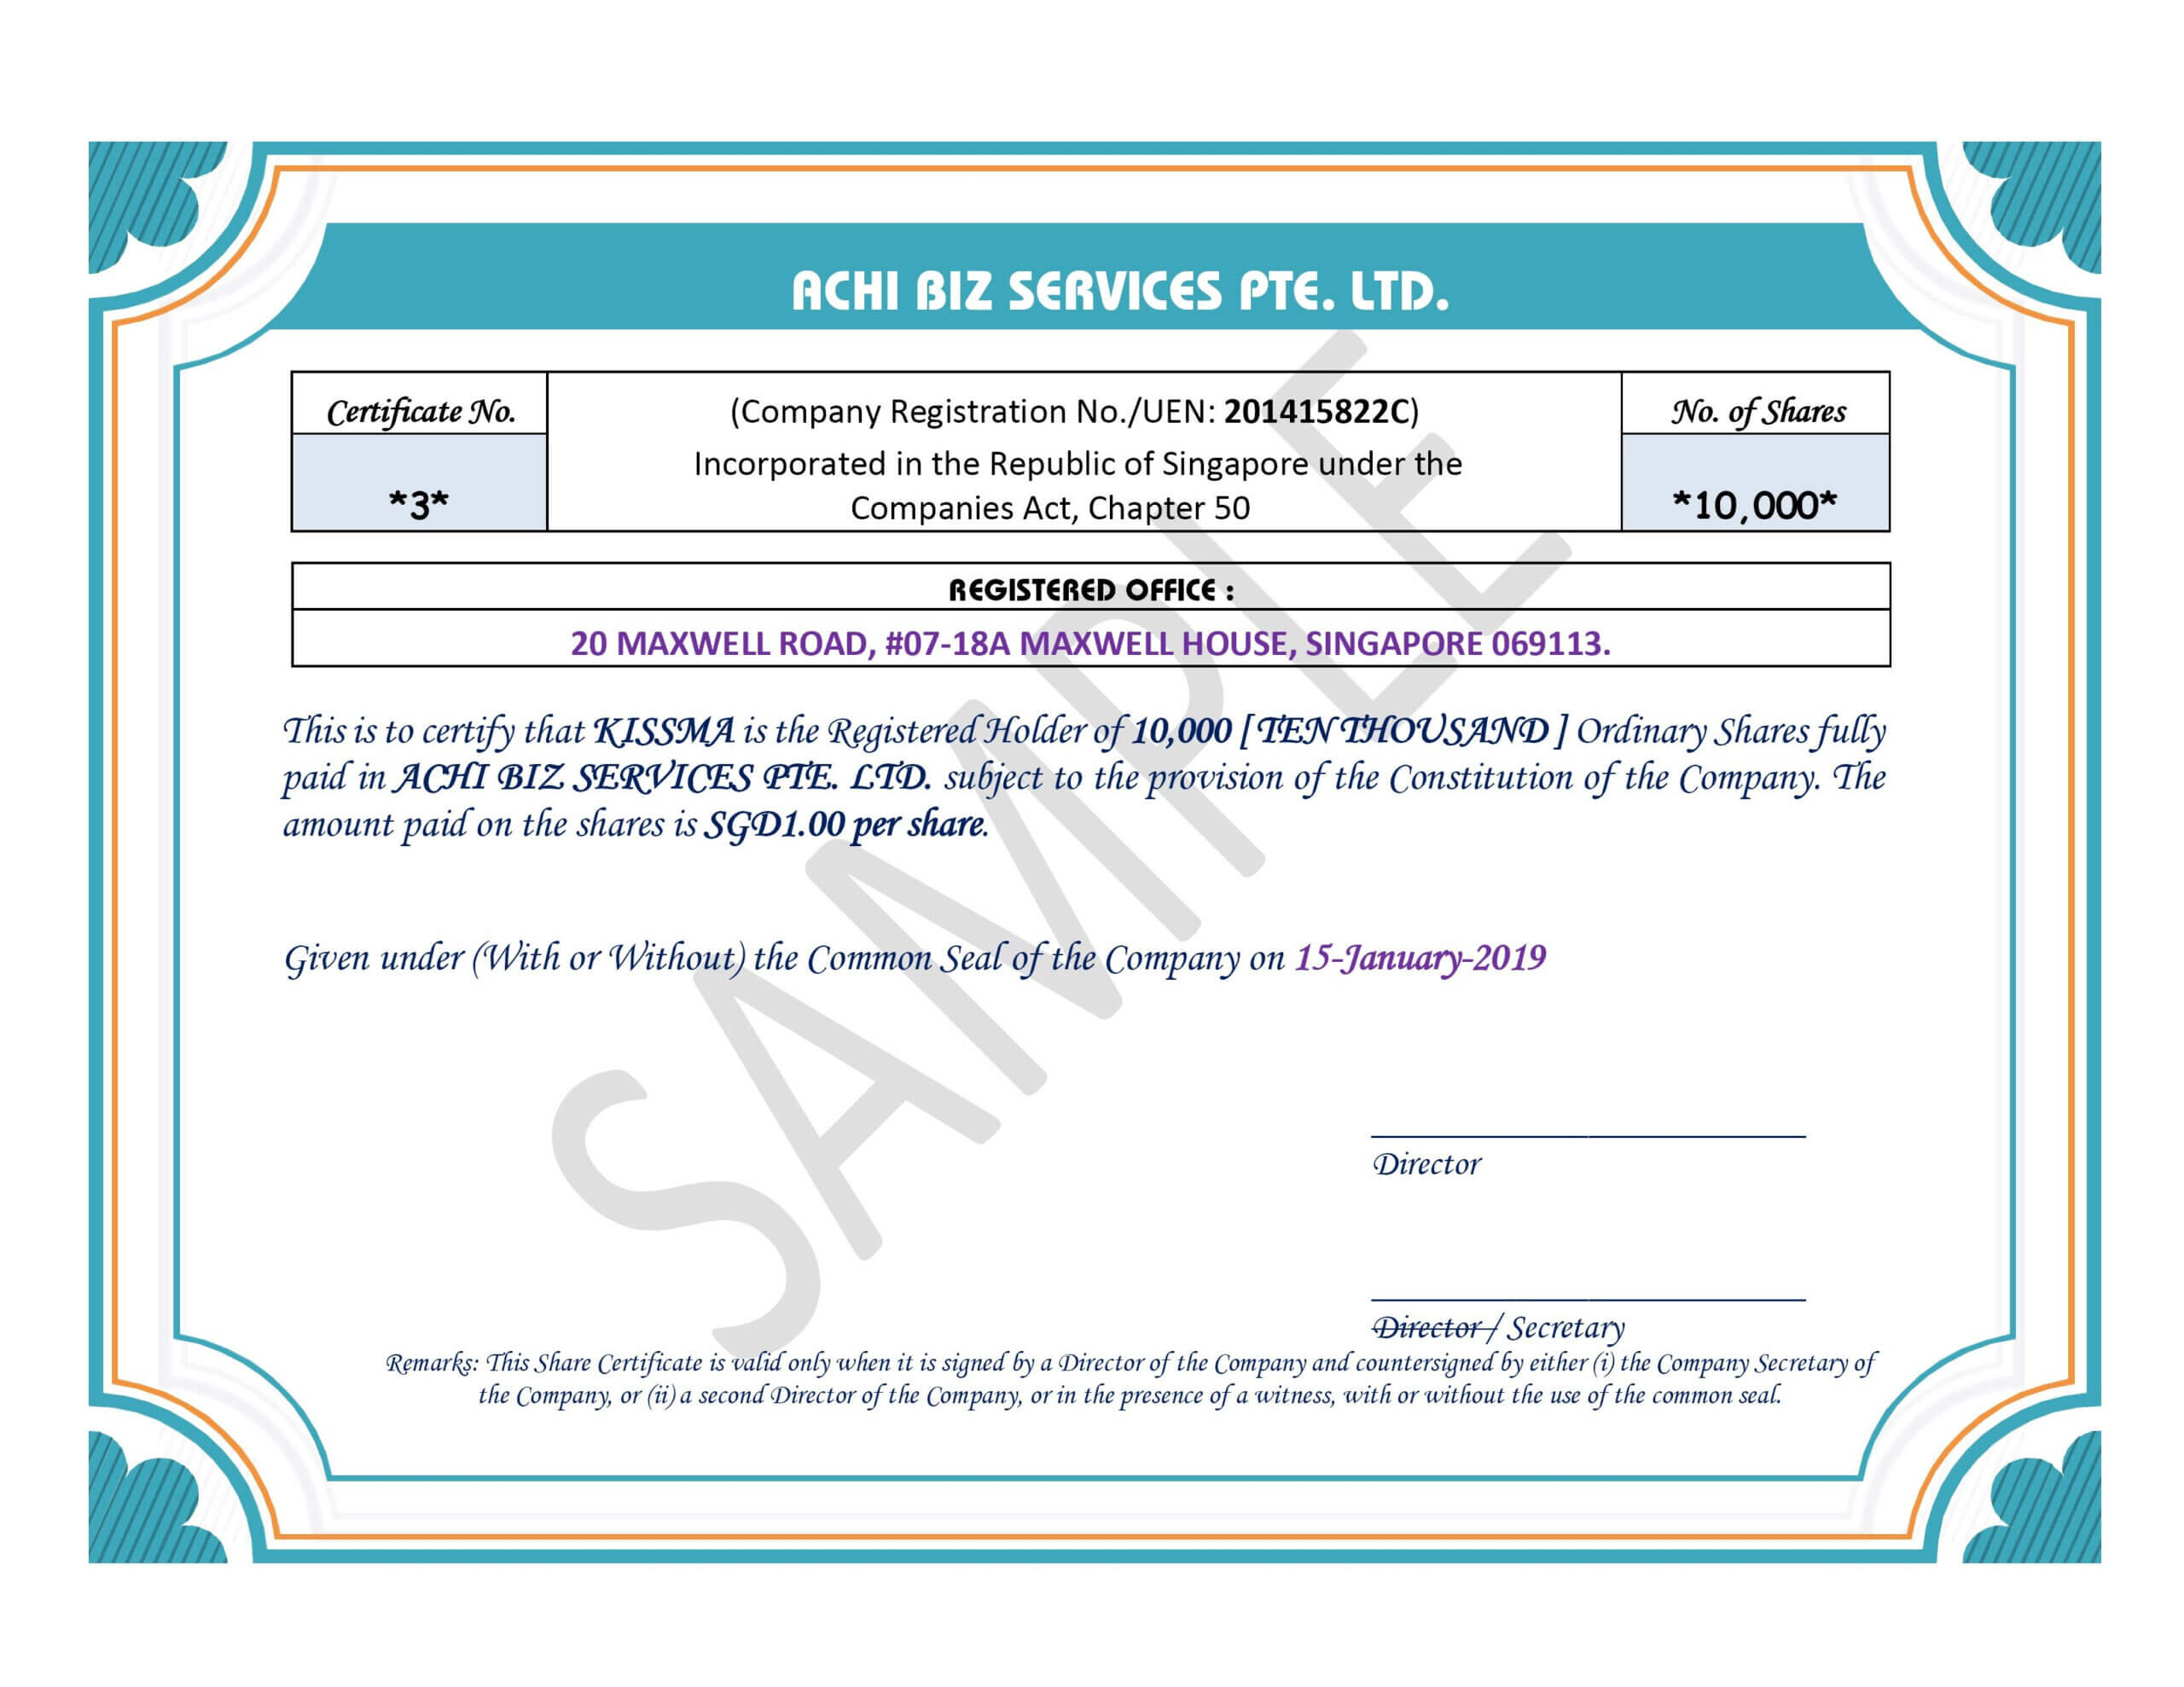 Share Certificate In Singapore ~ Achibiz Intended For Share Certificate Template Companies House